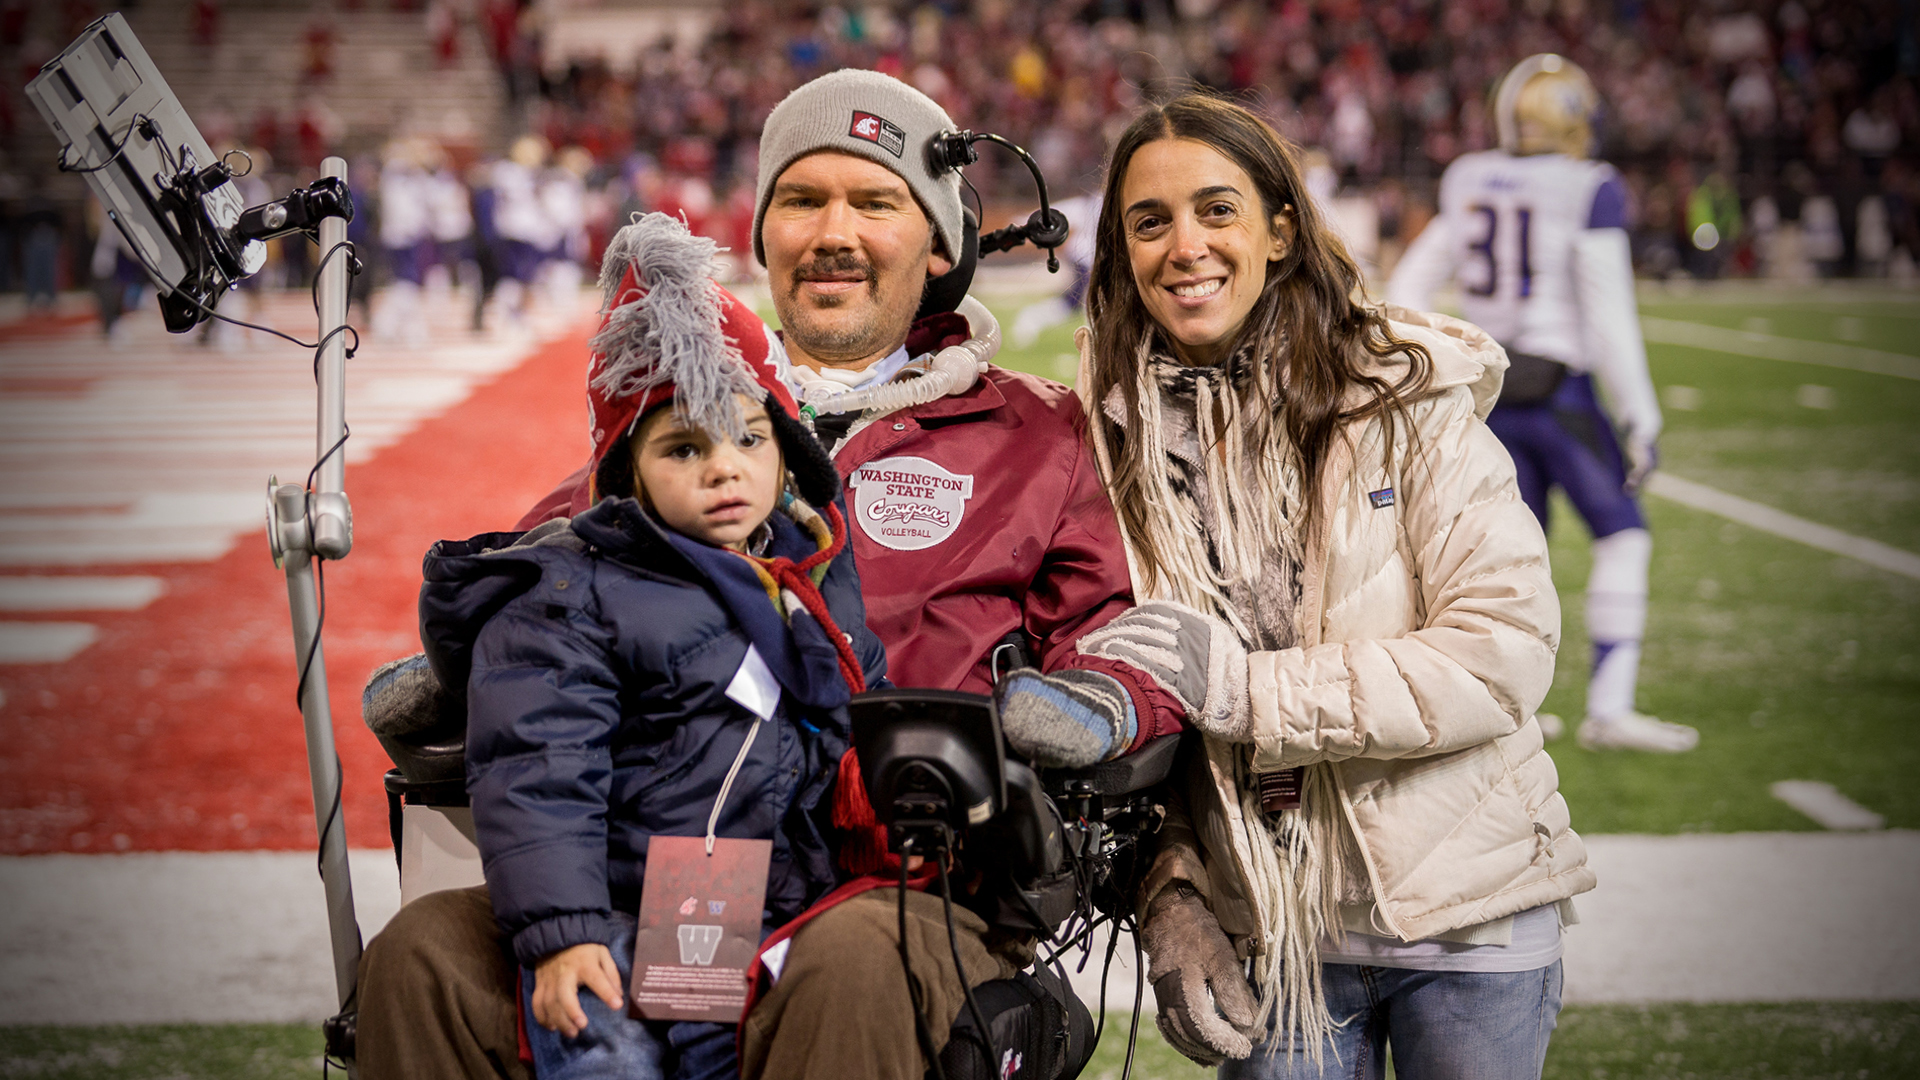 For the win: The Gleason family is the focus of a new documentary that details Steve Gleason's battle with ALS. | &#169; 2016 DEAR RIVERS, LLC